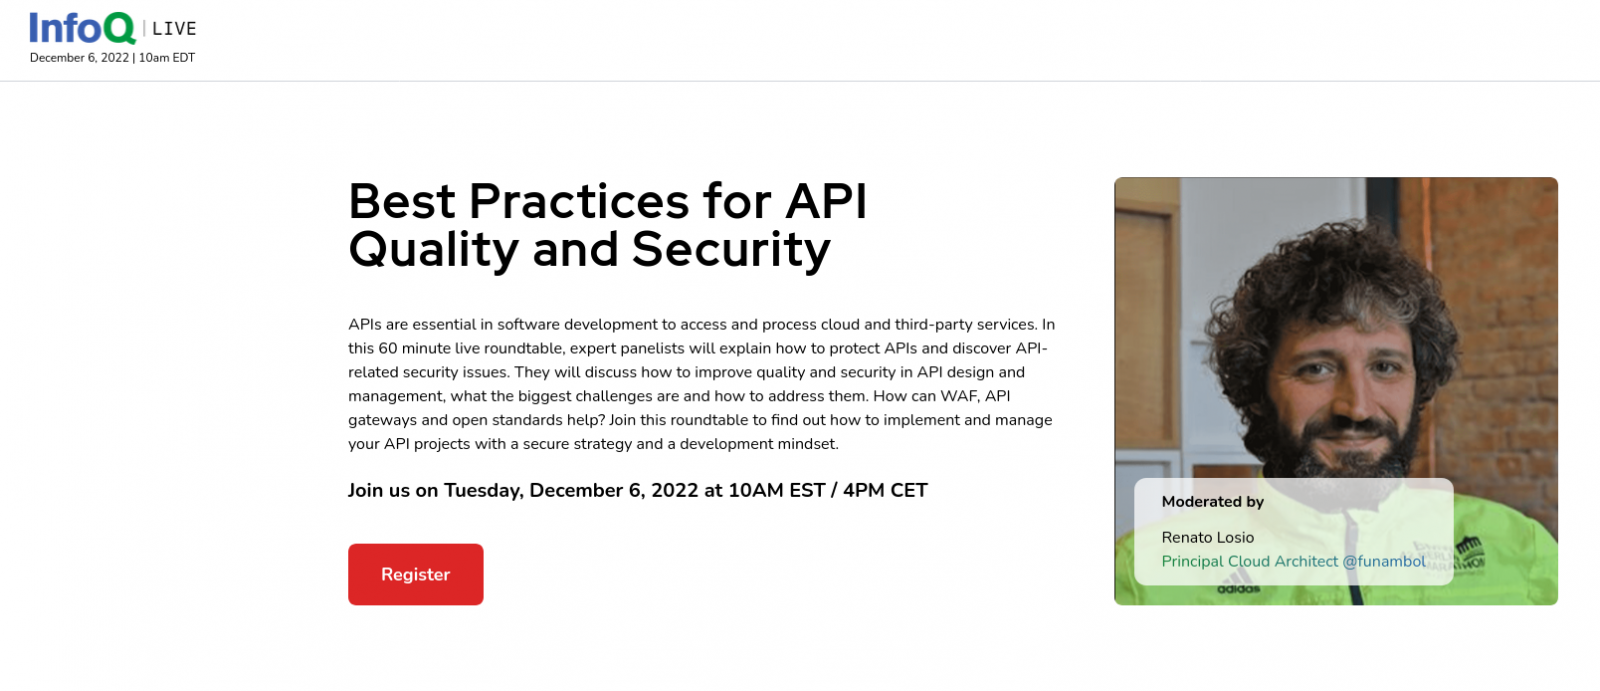 Roundtable: Best Practices for API Quality and Security